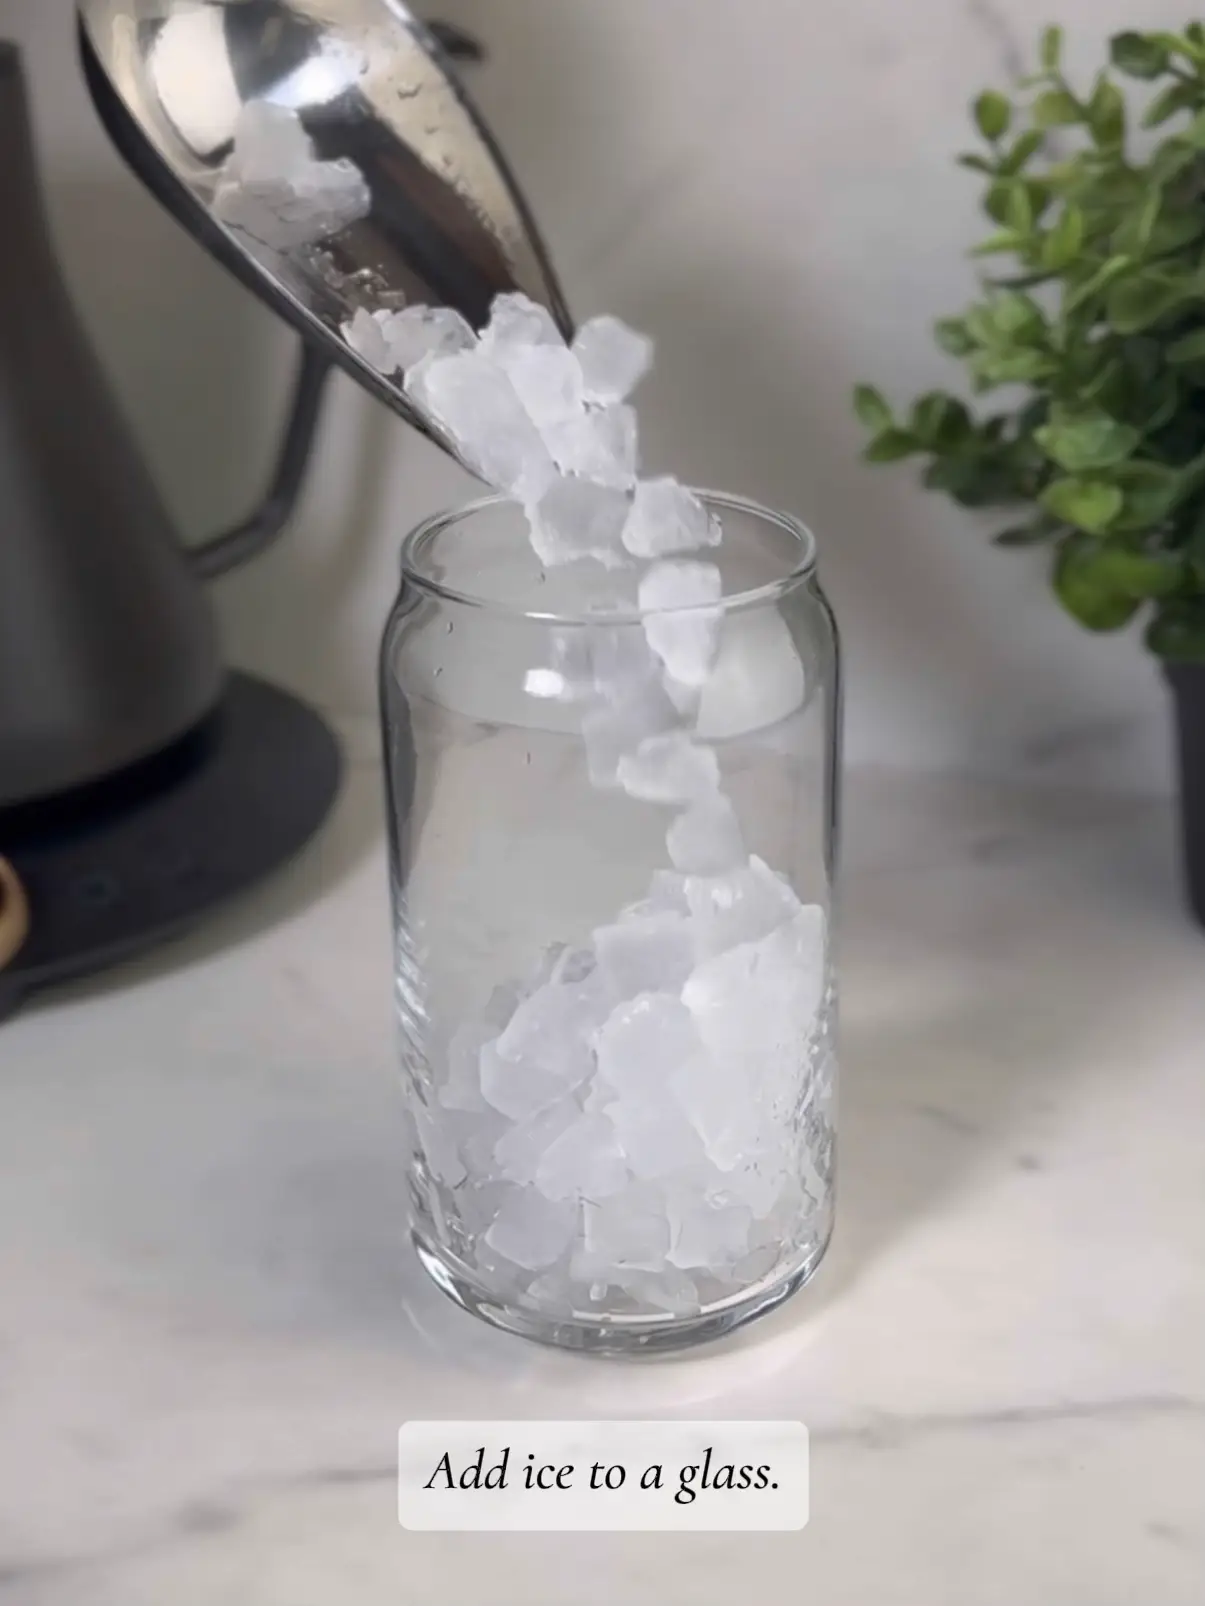  A glass with ice and a lemon in it.